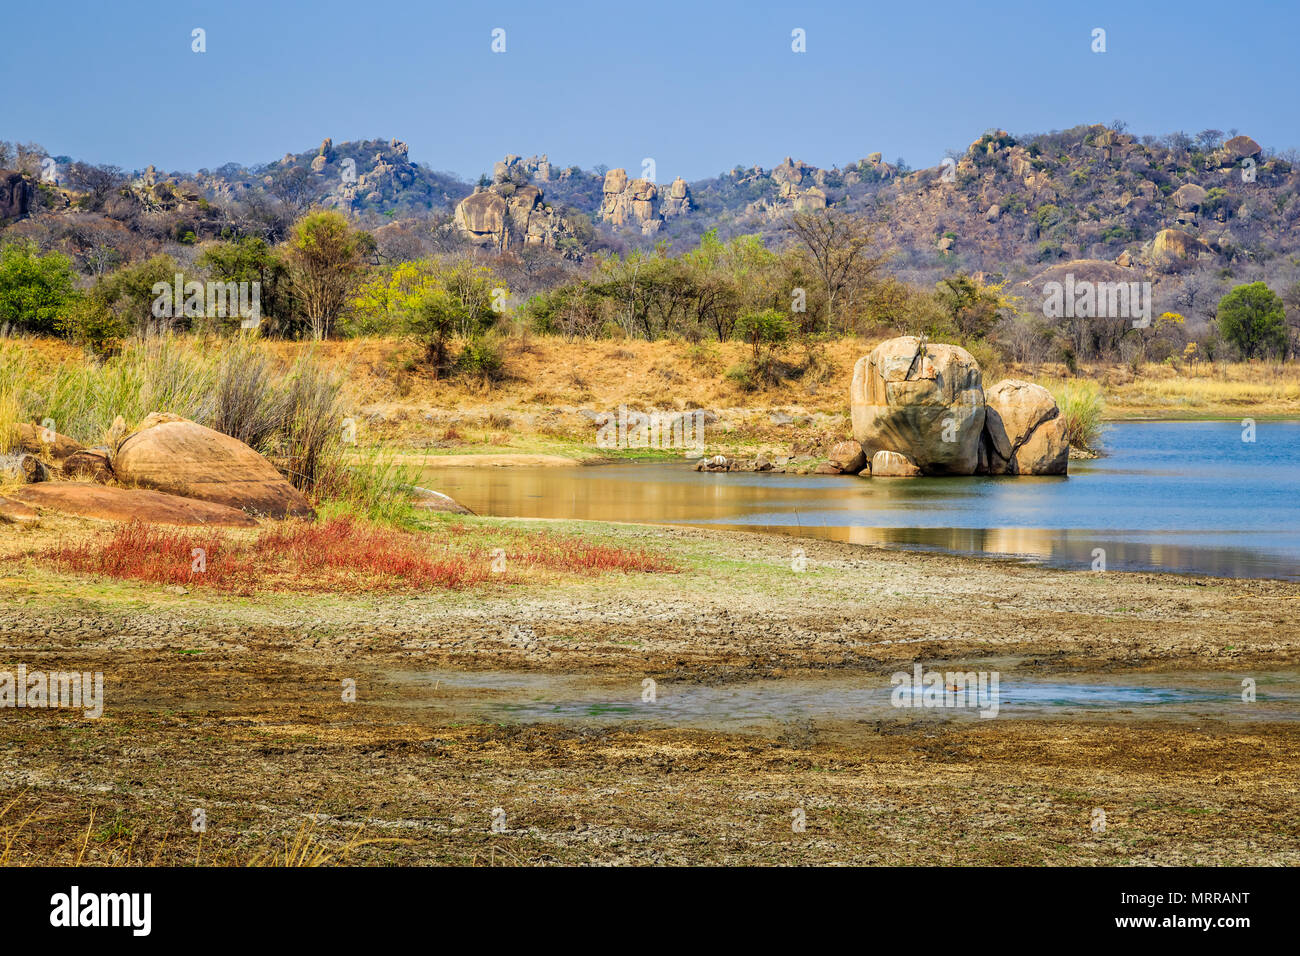 View of a lake surrounded by rocks, in Matobo National Park, Zimbabwe. September 26, 2016. Stock Photo